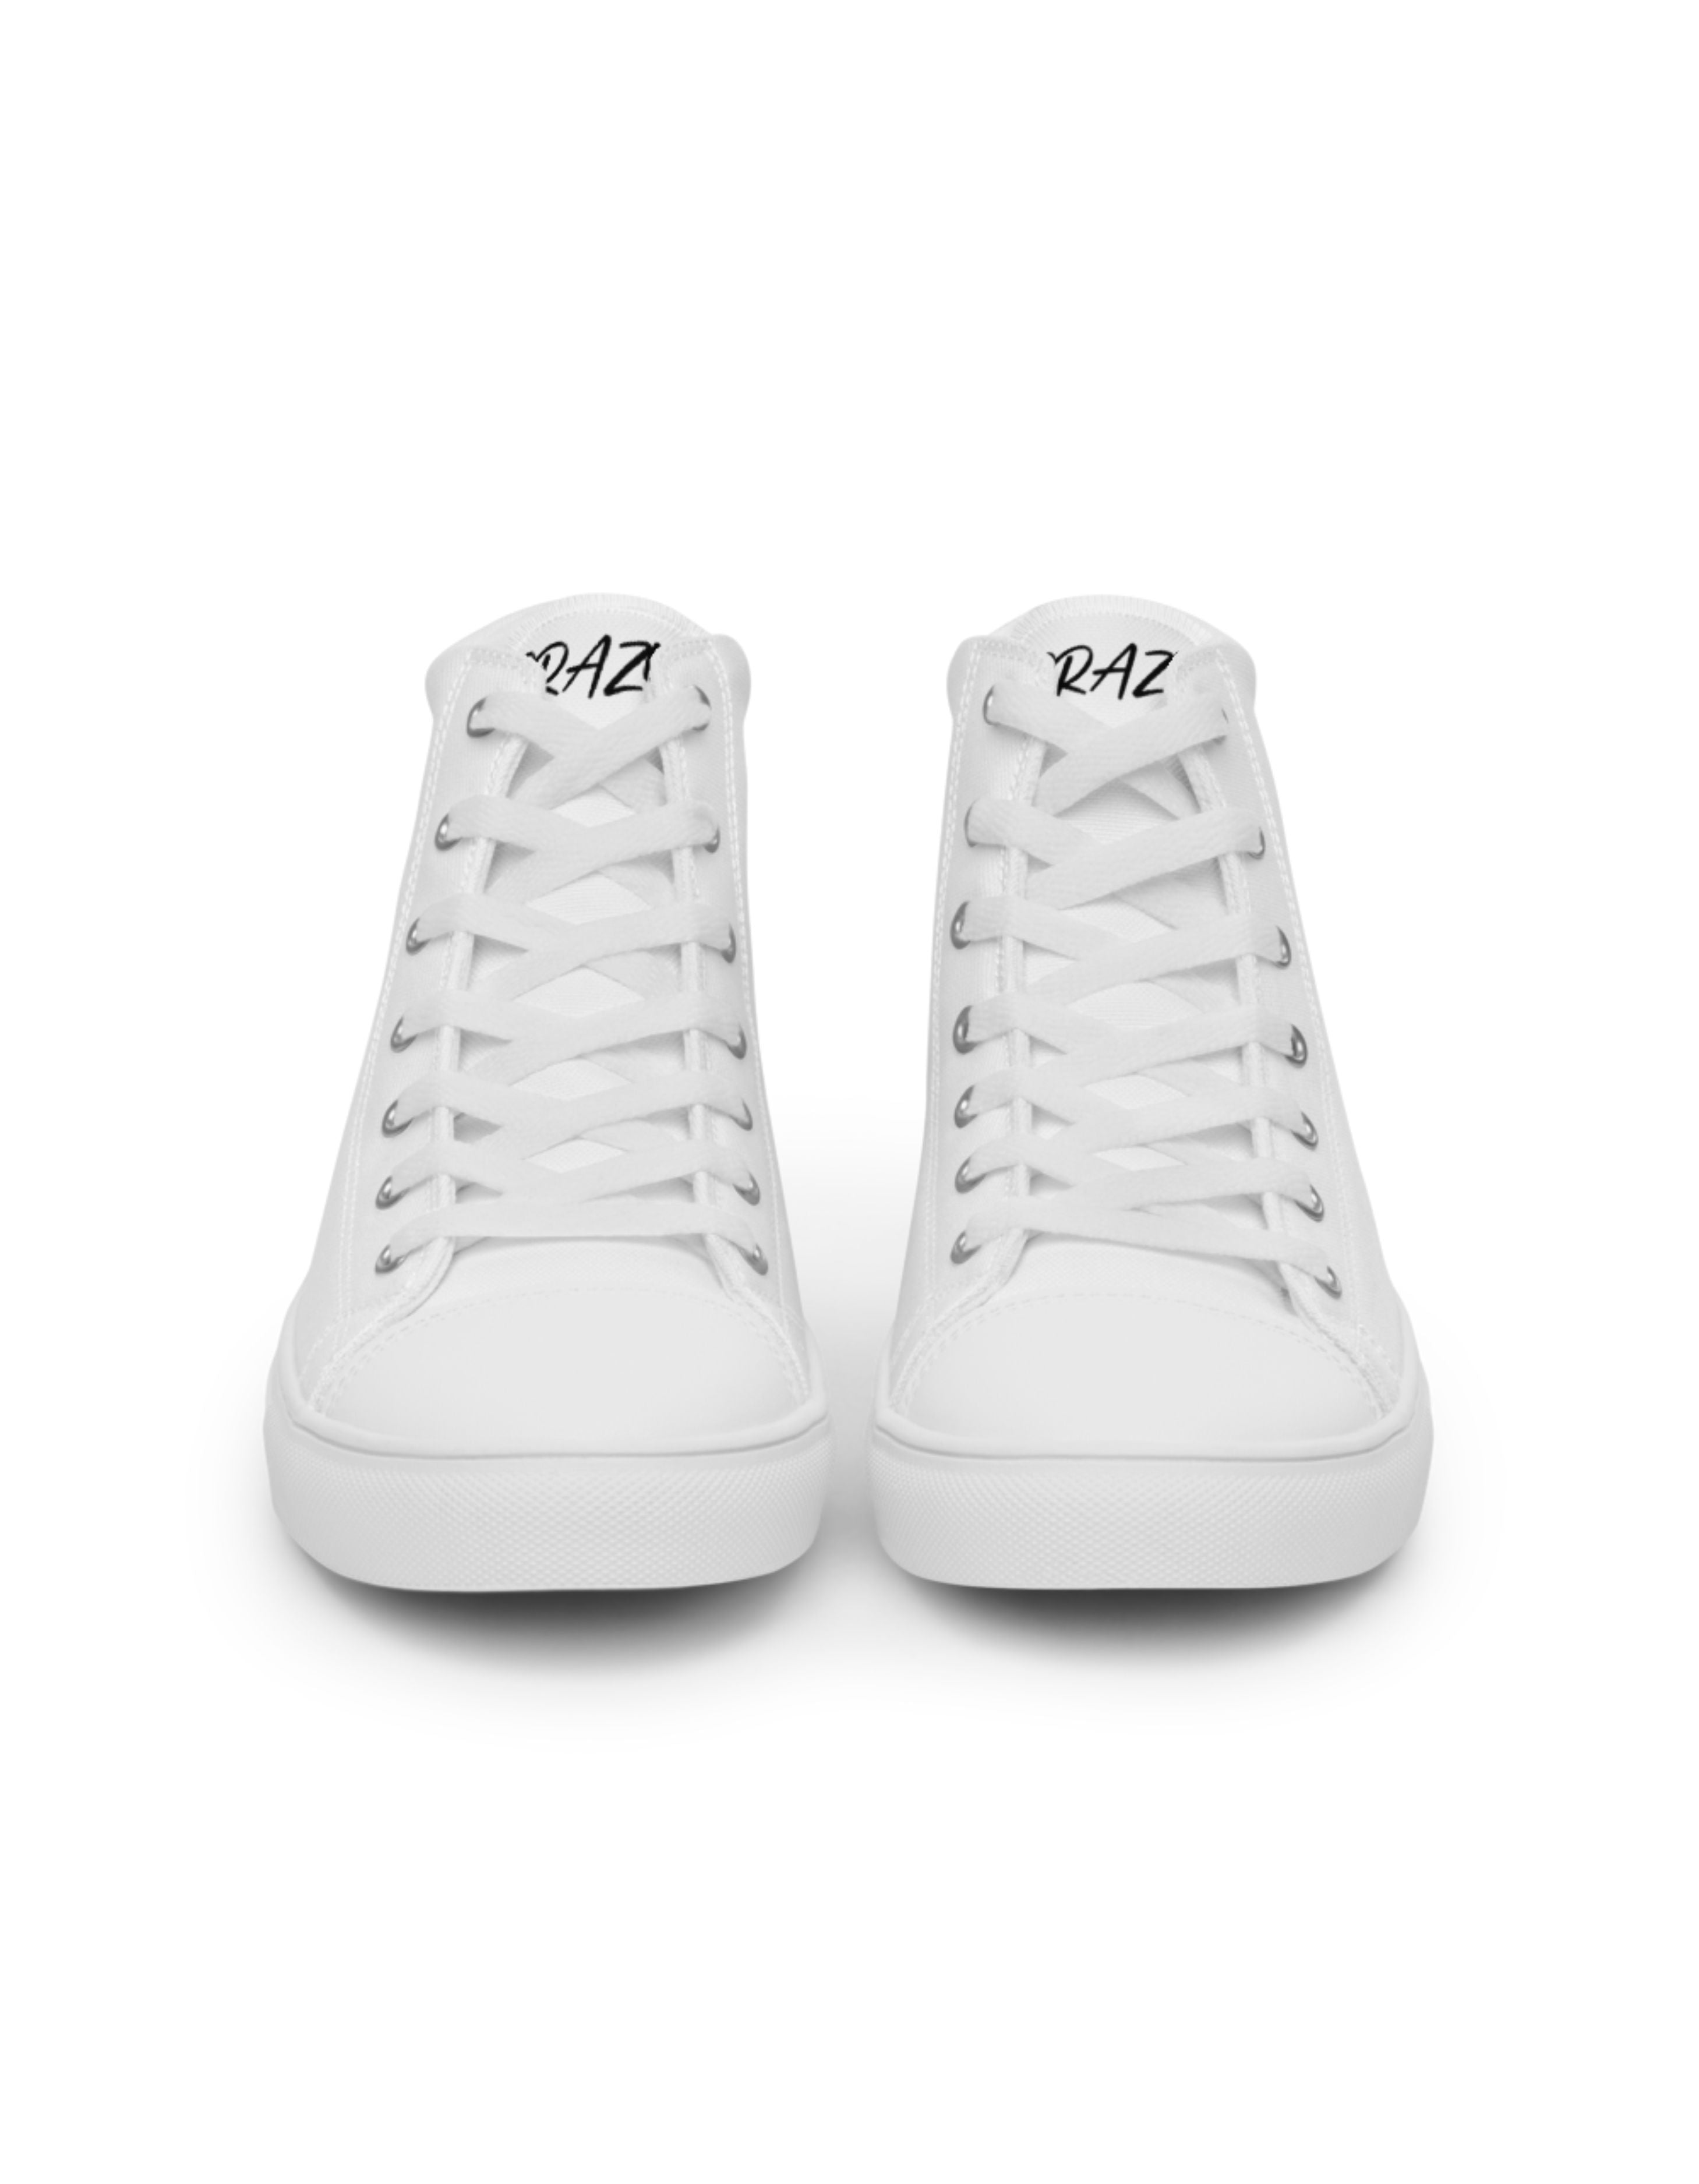 "SAY MY NAME" hoge witte canvas damessneakers